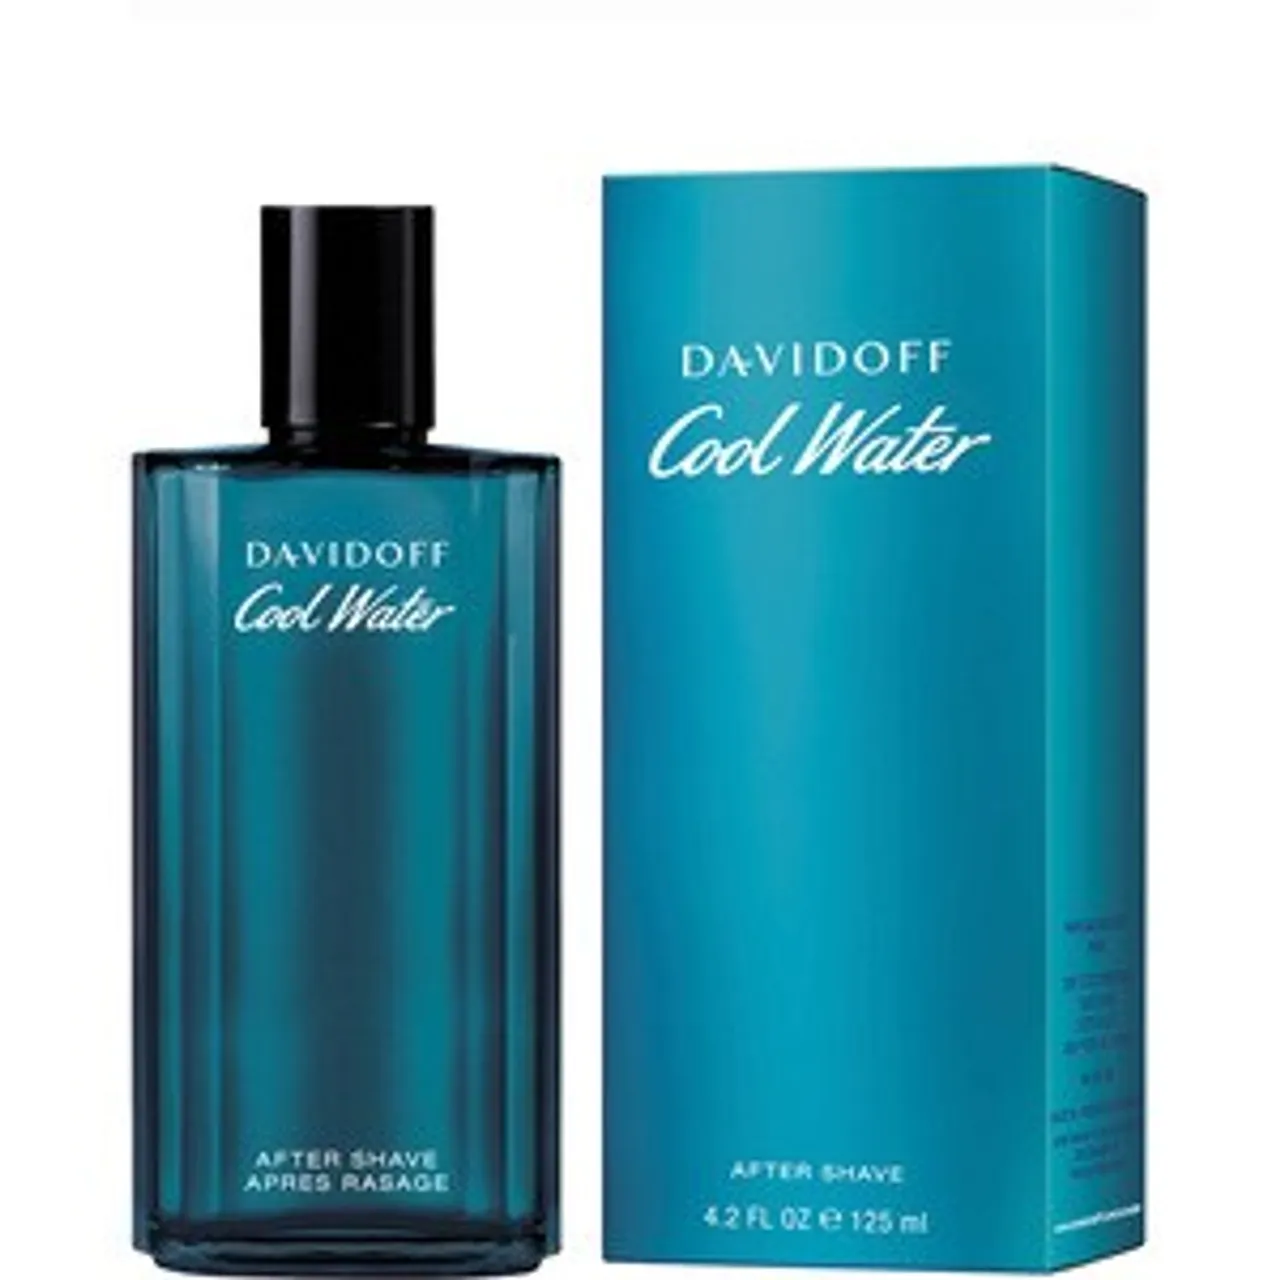 Davidoff Cool Water Man AFTER SHAVE 125 ML